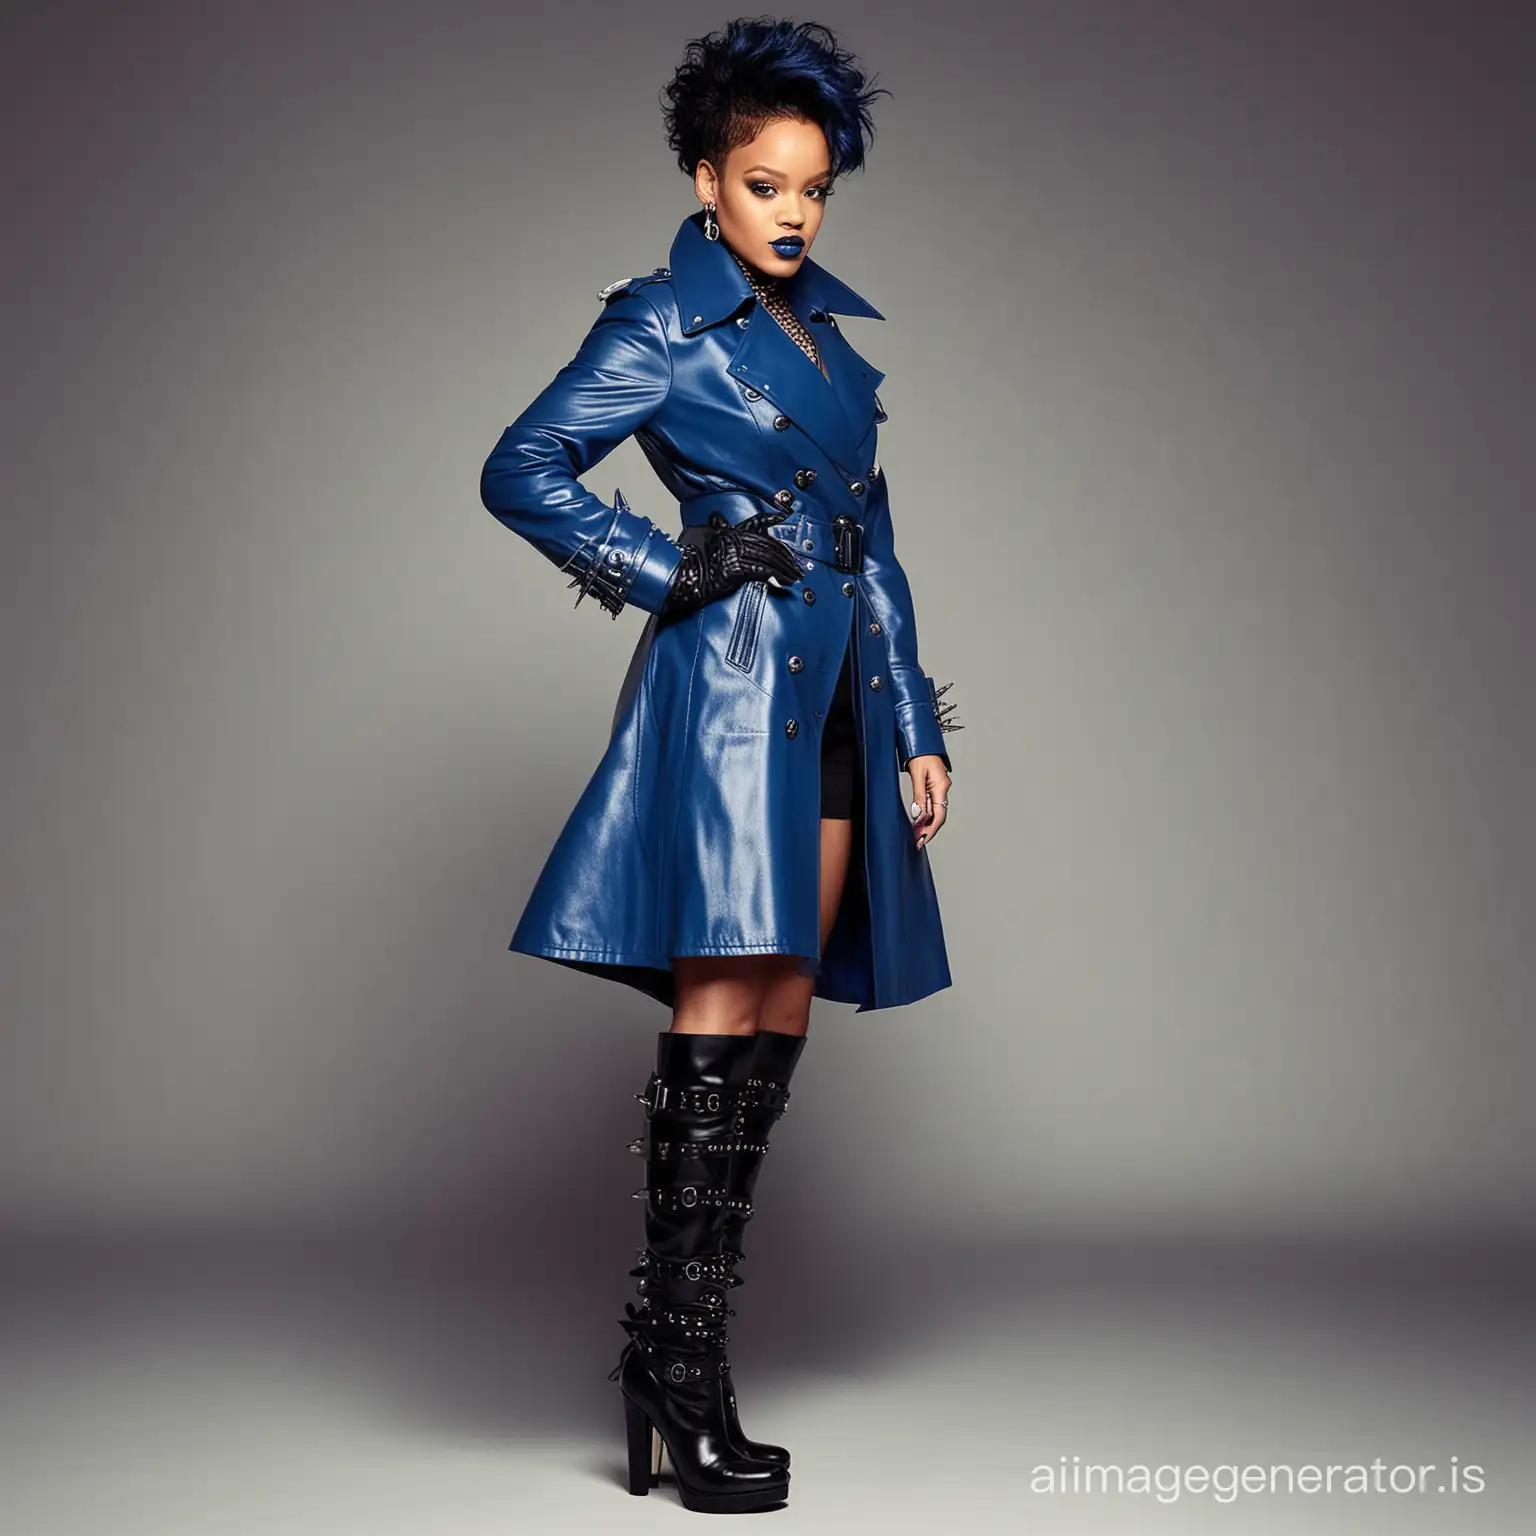 Rihanna,, large breasts, wearing blue leather trench coat, punk rock blue spike hair, spiked dog collar, high heel leather boots, leather bra, black lipstick,, black leather buckles, black leather gloves